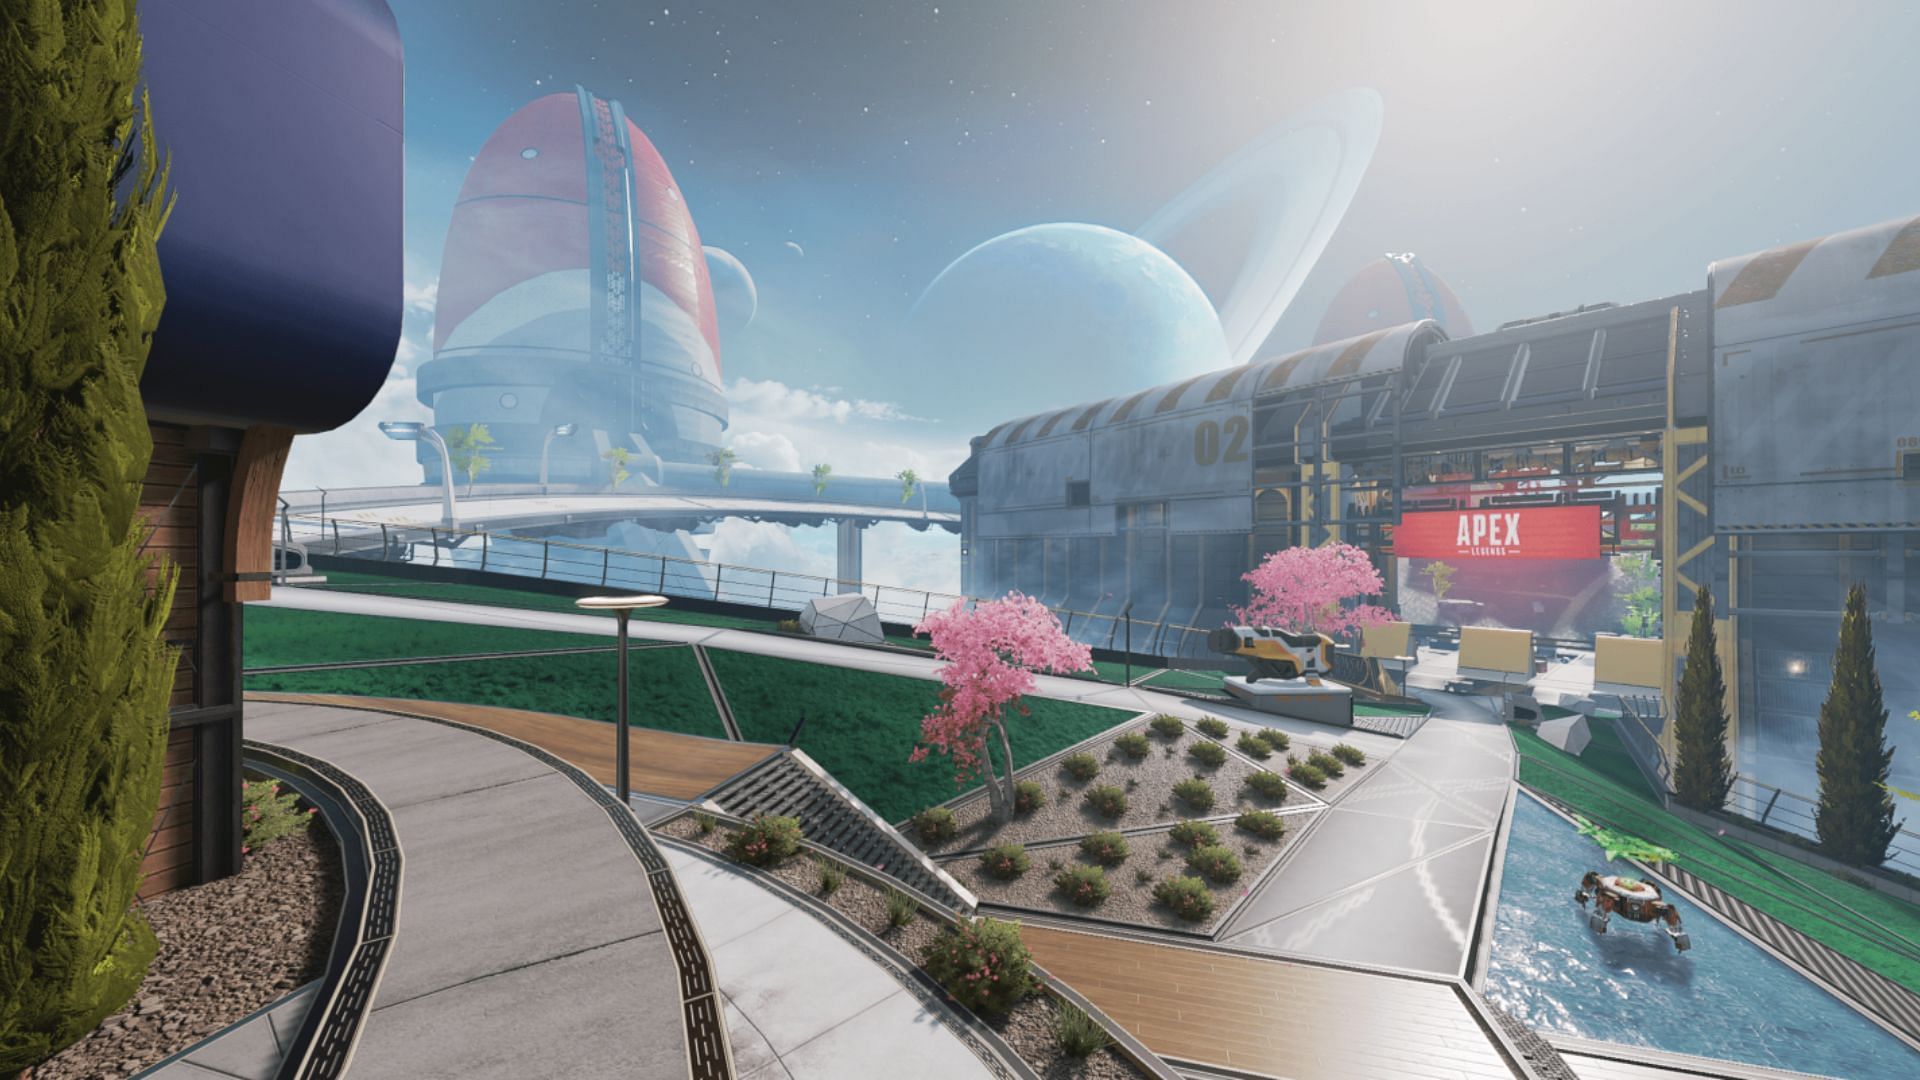 Phase Driver is situated on the newly expanded South side of the map (Image by Respawn)